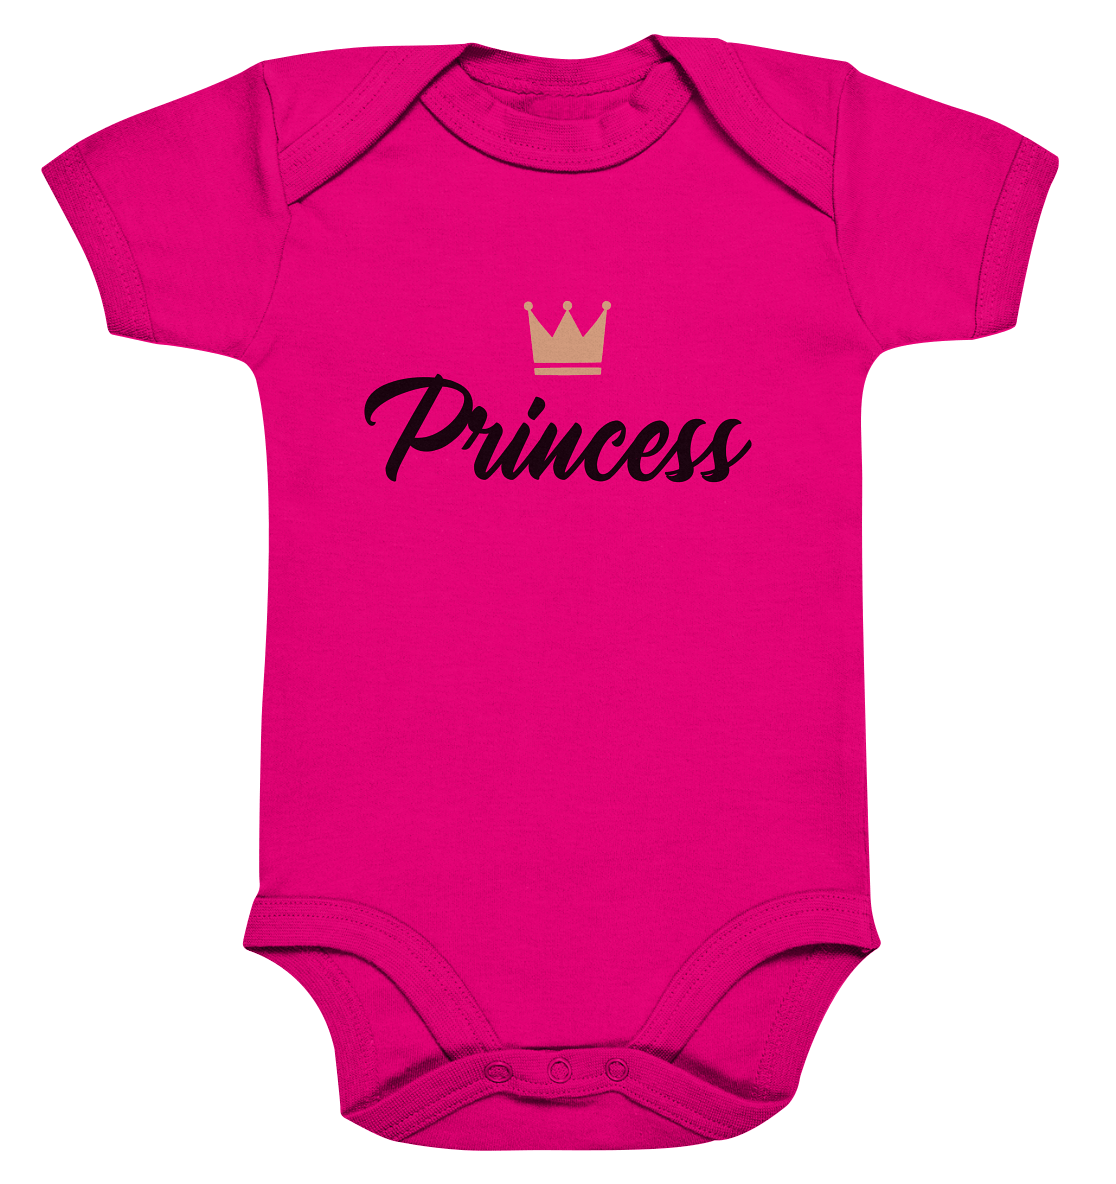 Princess Baby Bodysuite Familienoutfit King, Queen und Princess Bloominic 